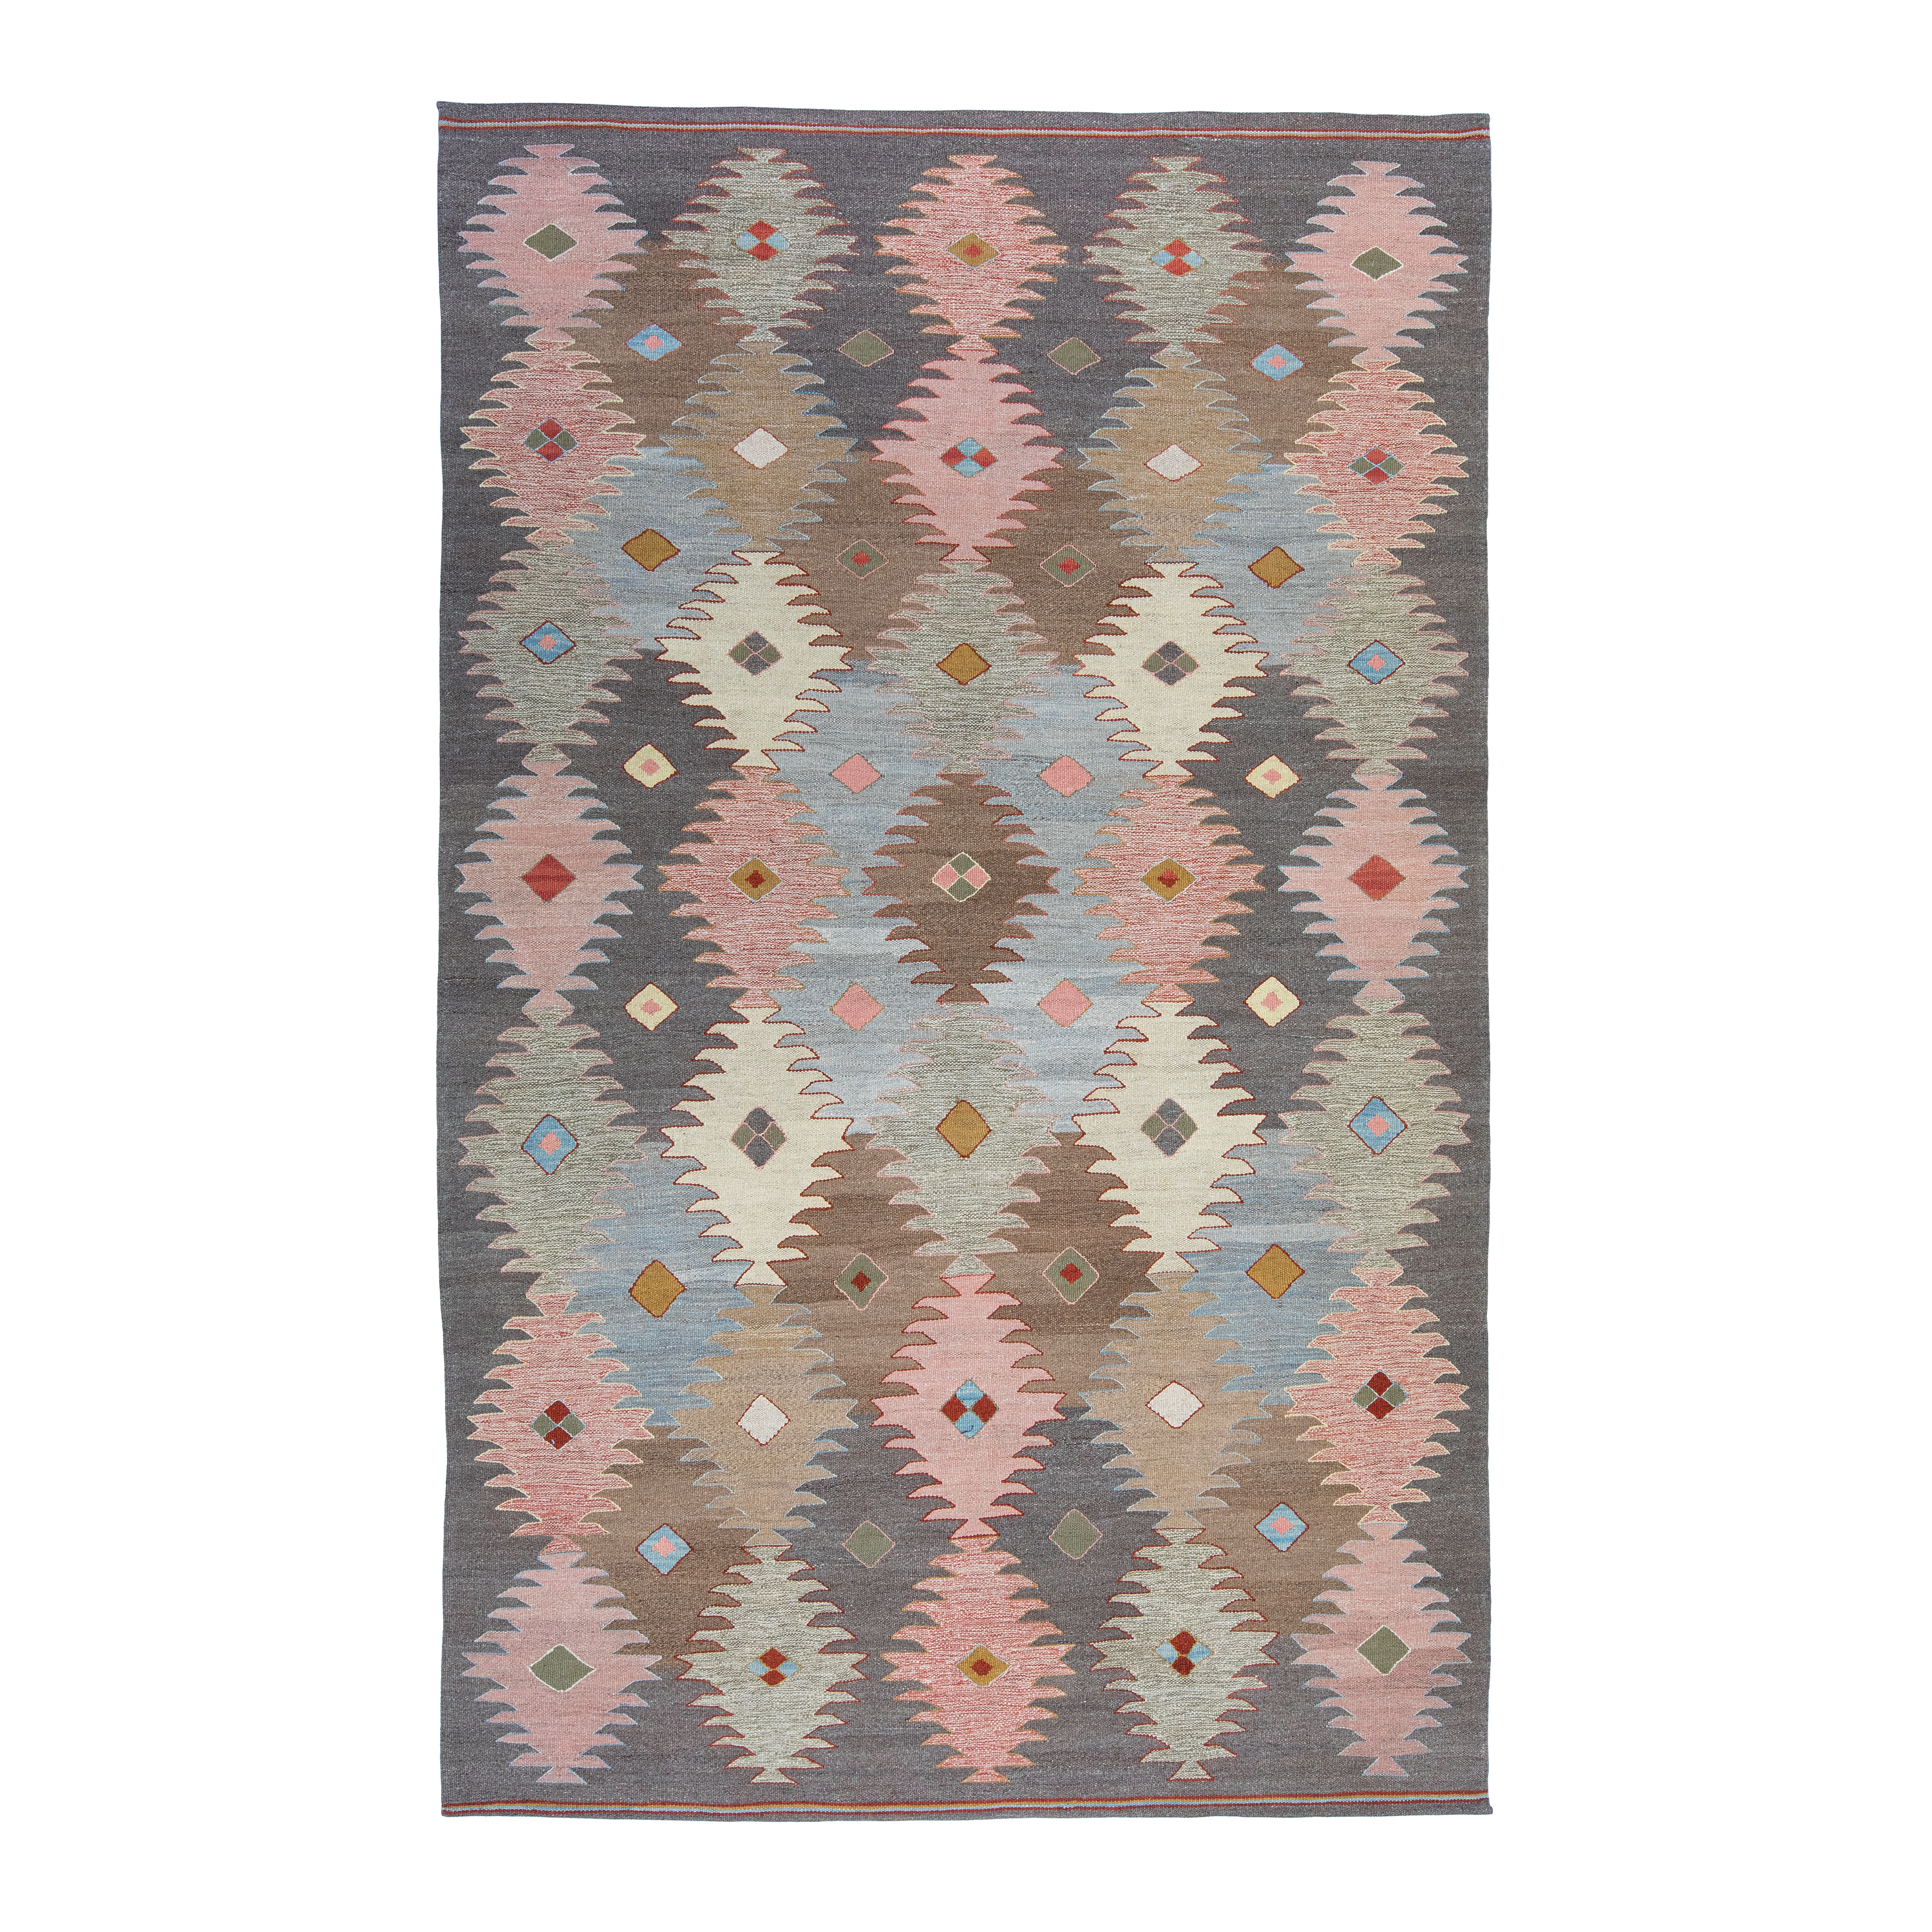 Kalach flatweave rug resembles the rare and collectible antique Khalaj kilim by a renowned Turkish group that were produced in the 19th century and earlier.  